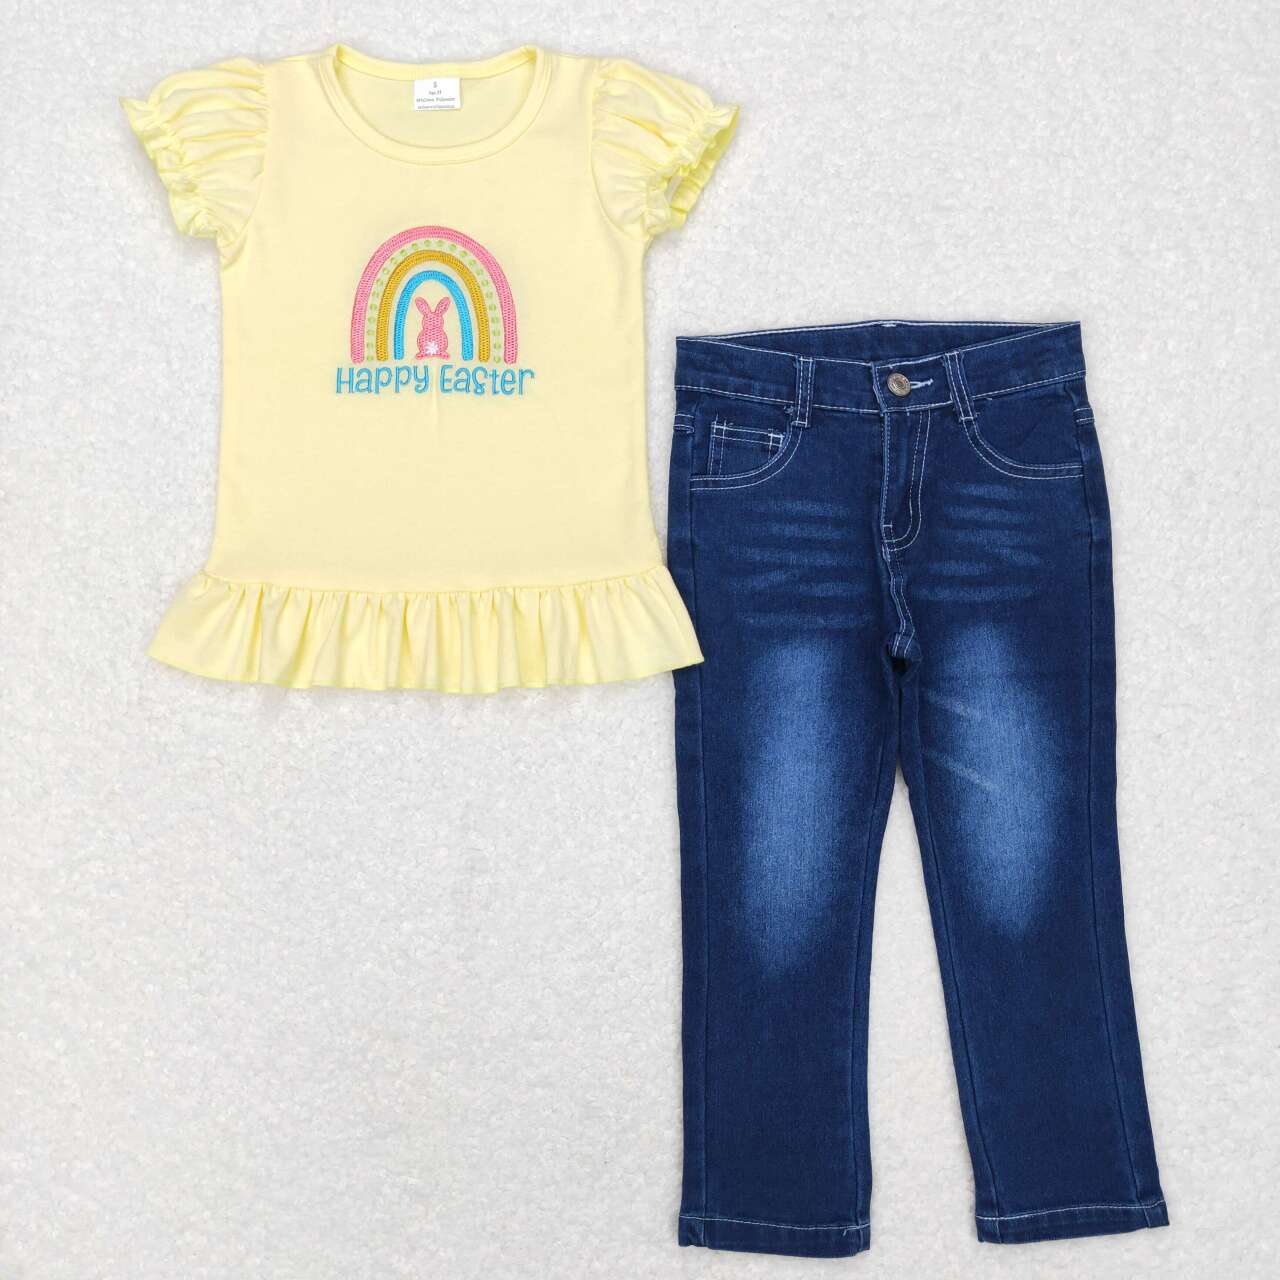 happy easter top jeans pants outfit